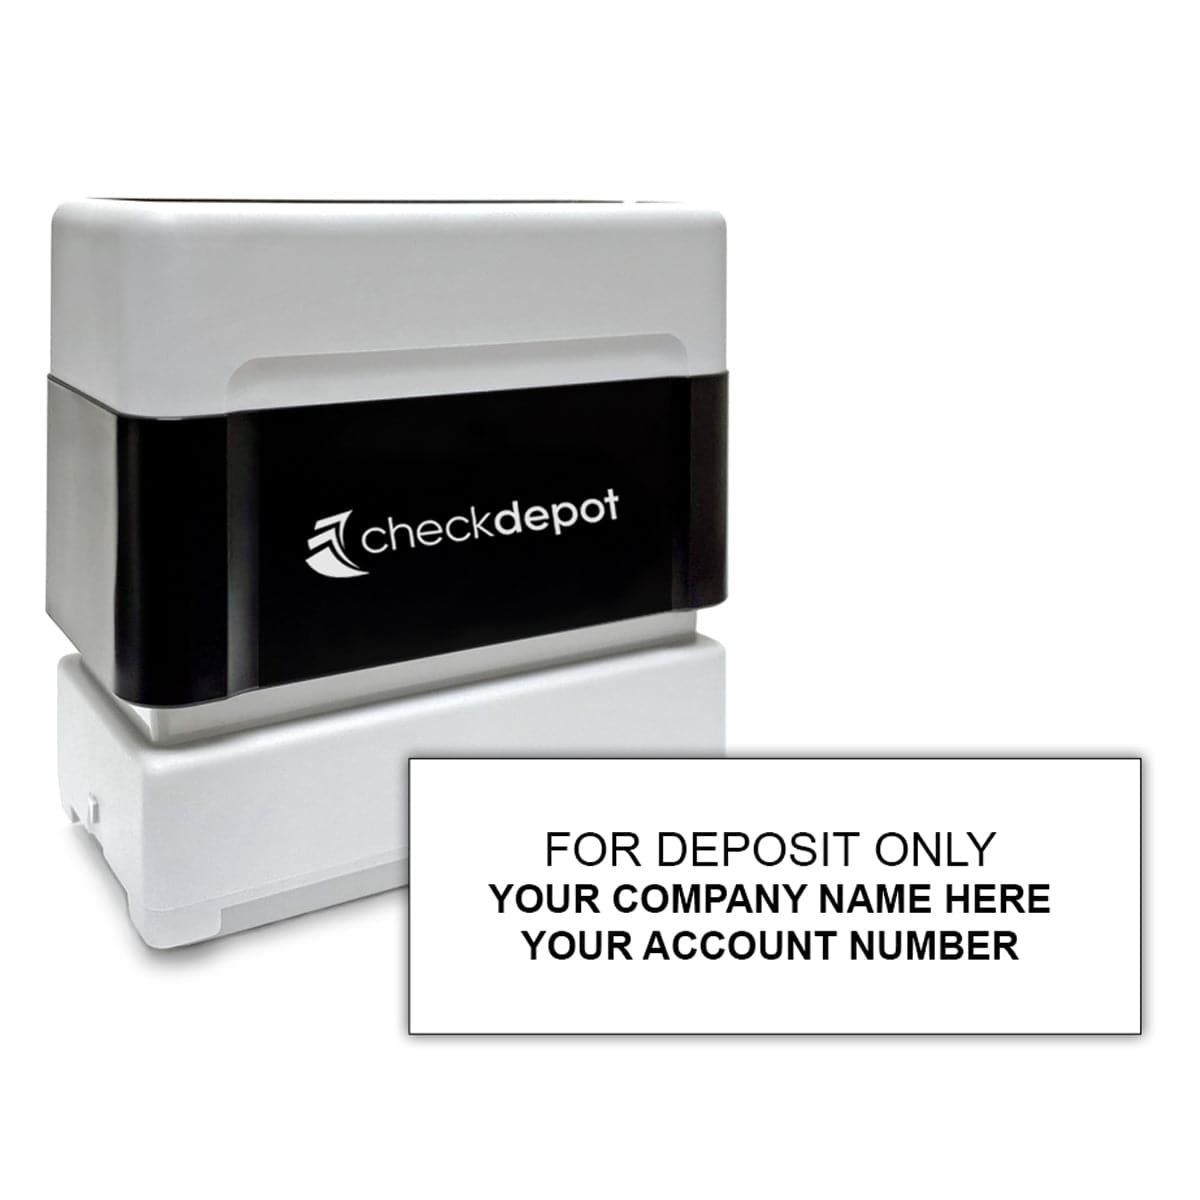 Self-Inking Stamp Refill - Check Depot